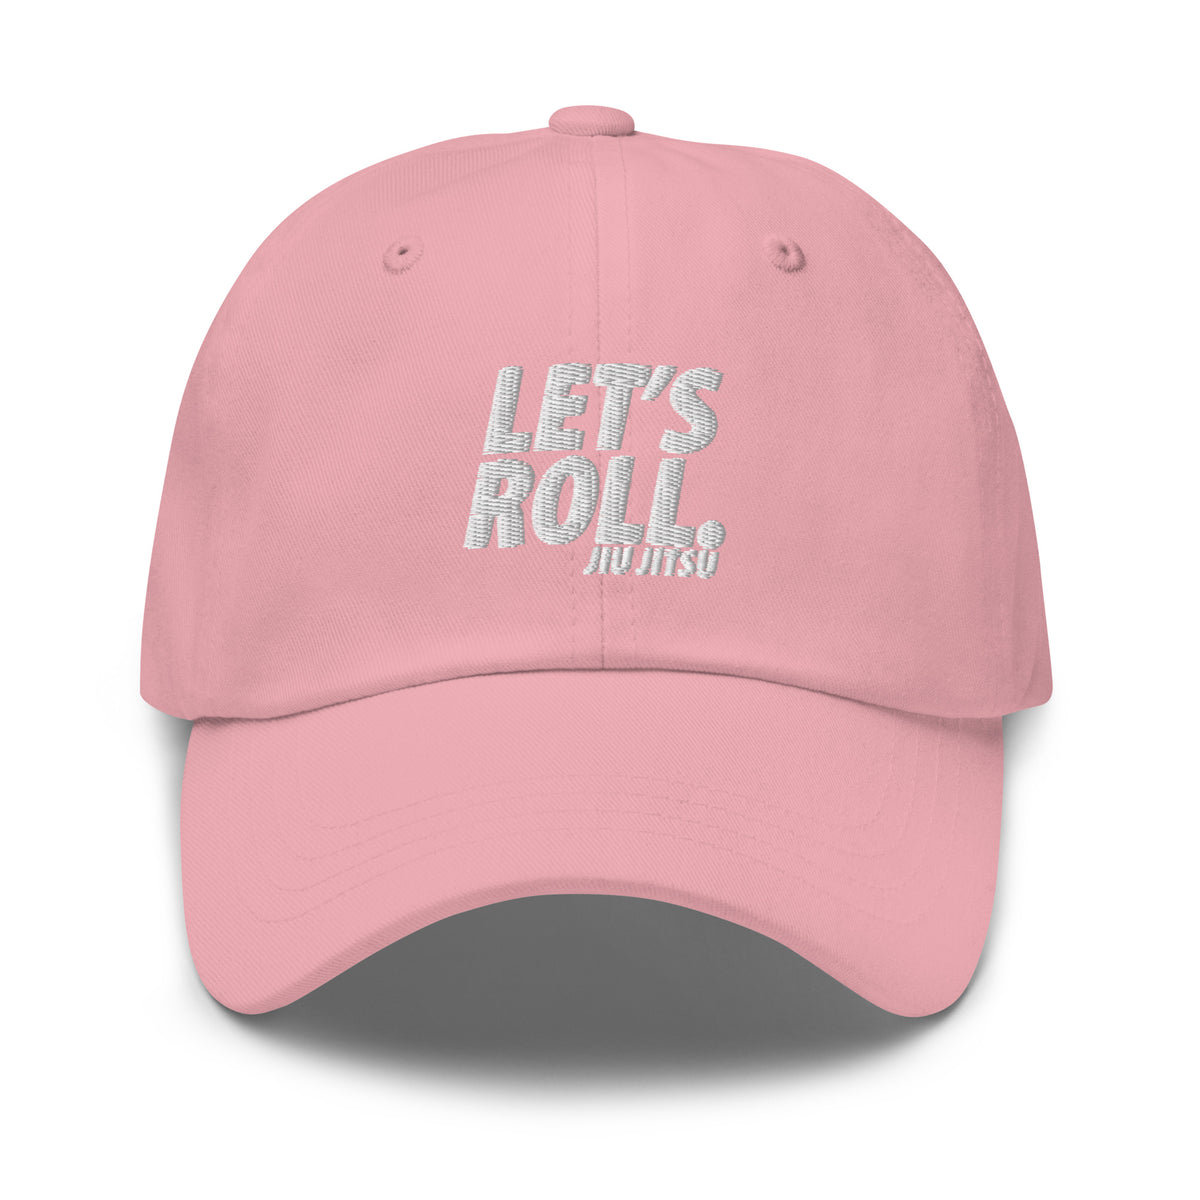 Lets Roll White Classic Dad Hat